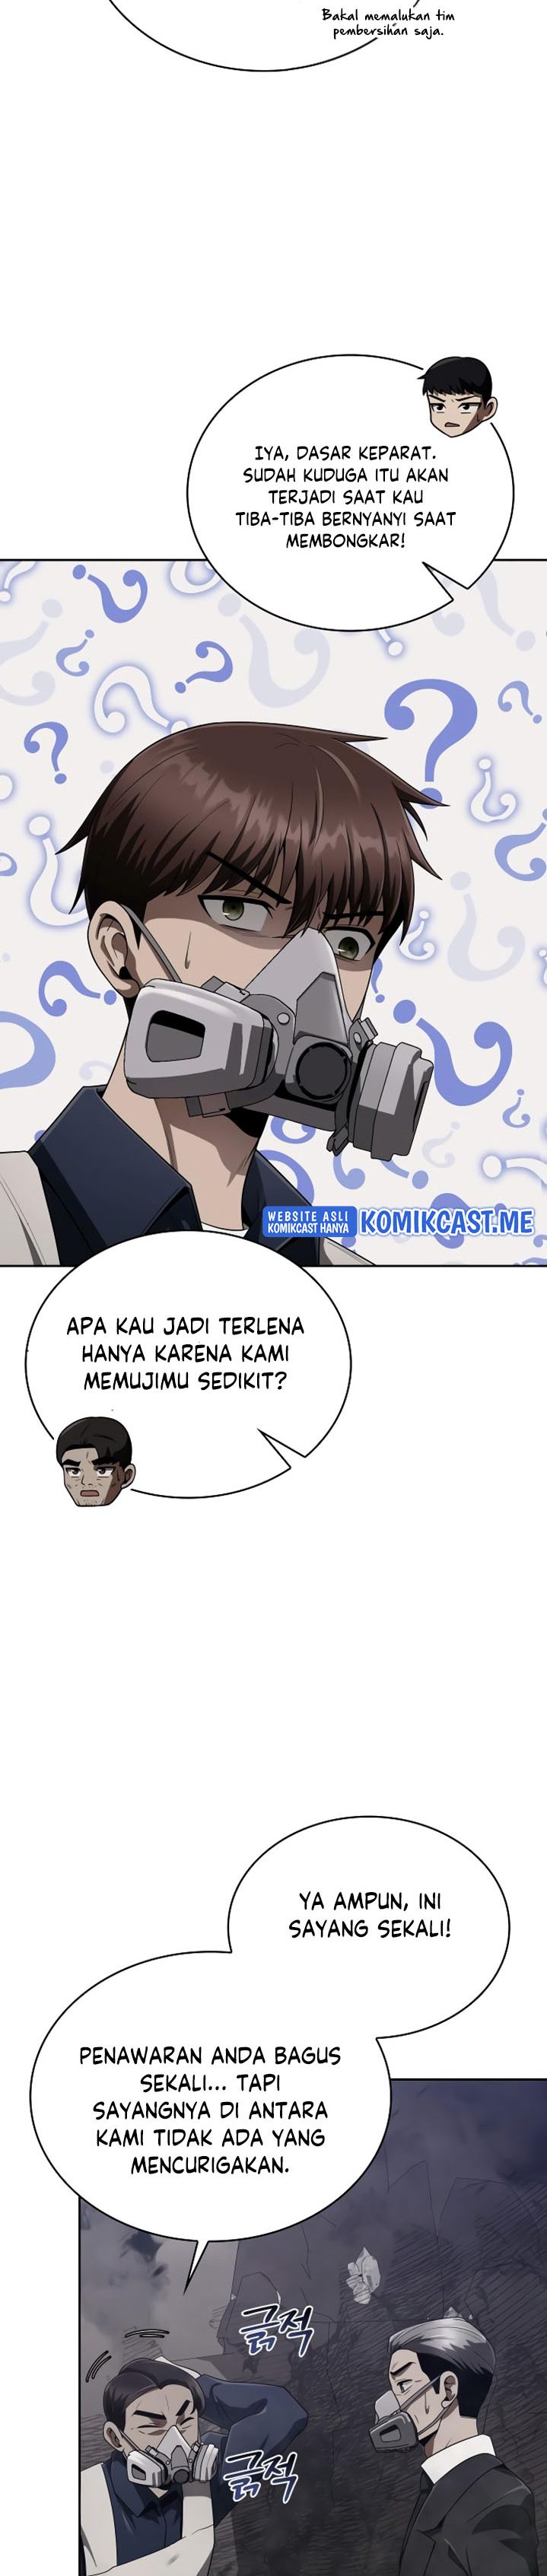 Dilarang COPAS - situs resmi www.mangacanblog.com - Komik clever cleaning life of the returned genius hunter 011 - chapter 11 12 Indonesia clever cleaning life of the returned genius hunter 011 - chapter 11 Terbaru 34|Baca Manga Komik Indonesia|Mangacan